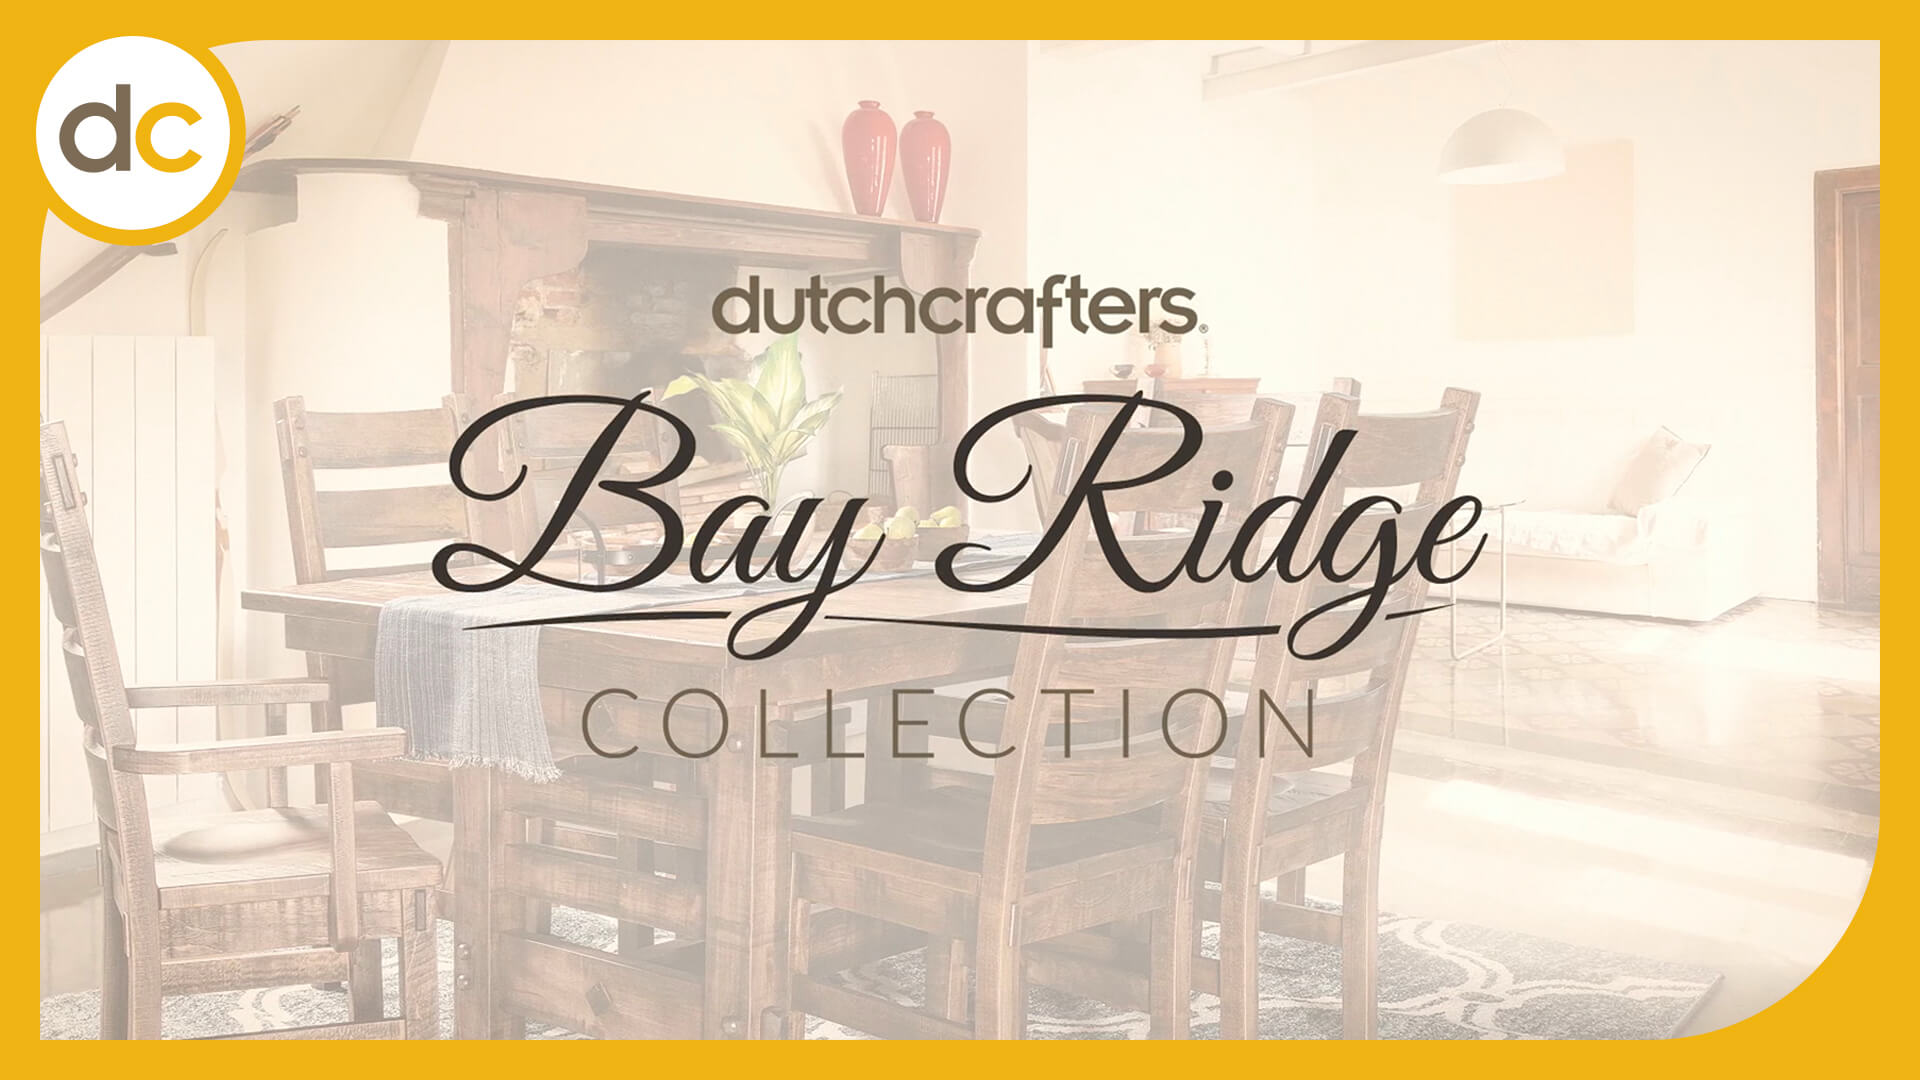 Video Title: DutchCrafters Bay Ridge Collection over a photo of a dining furniture set